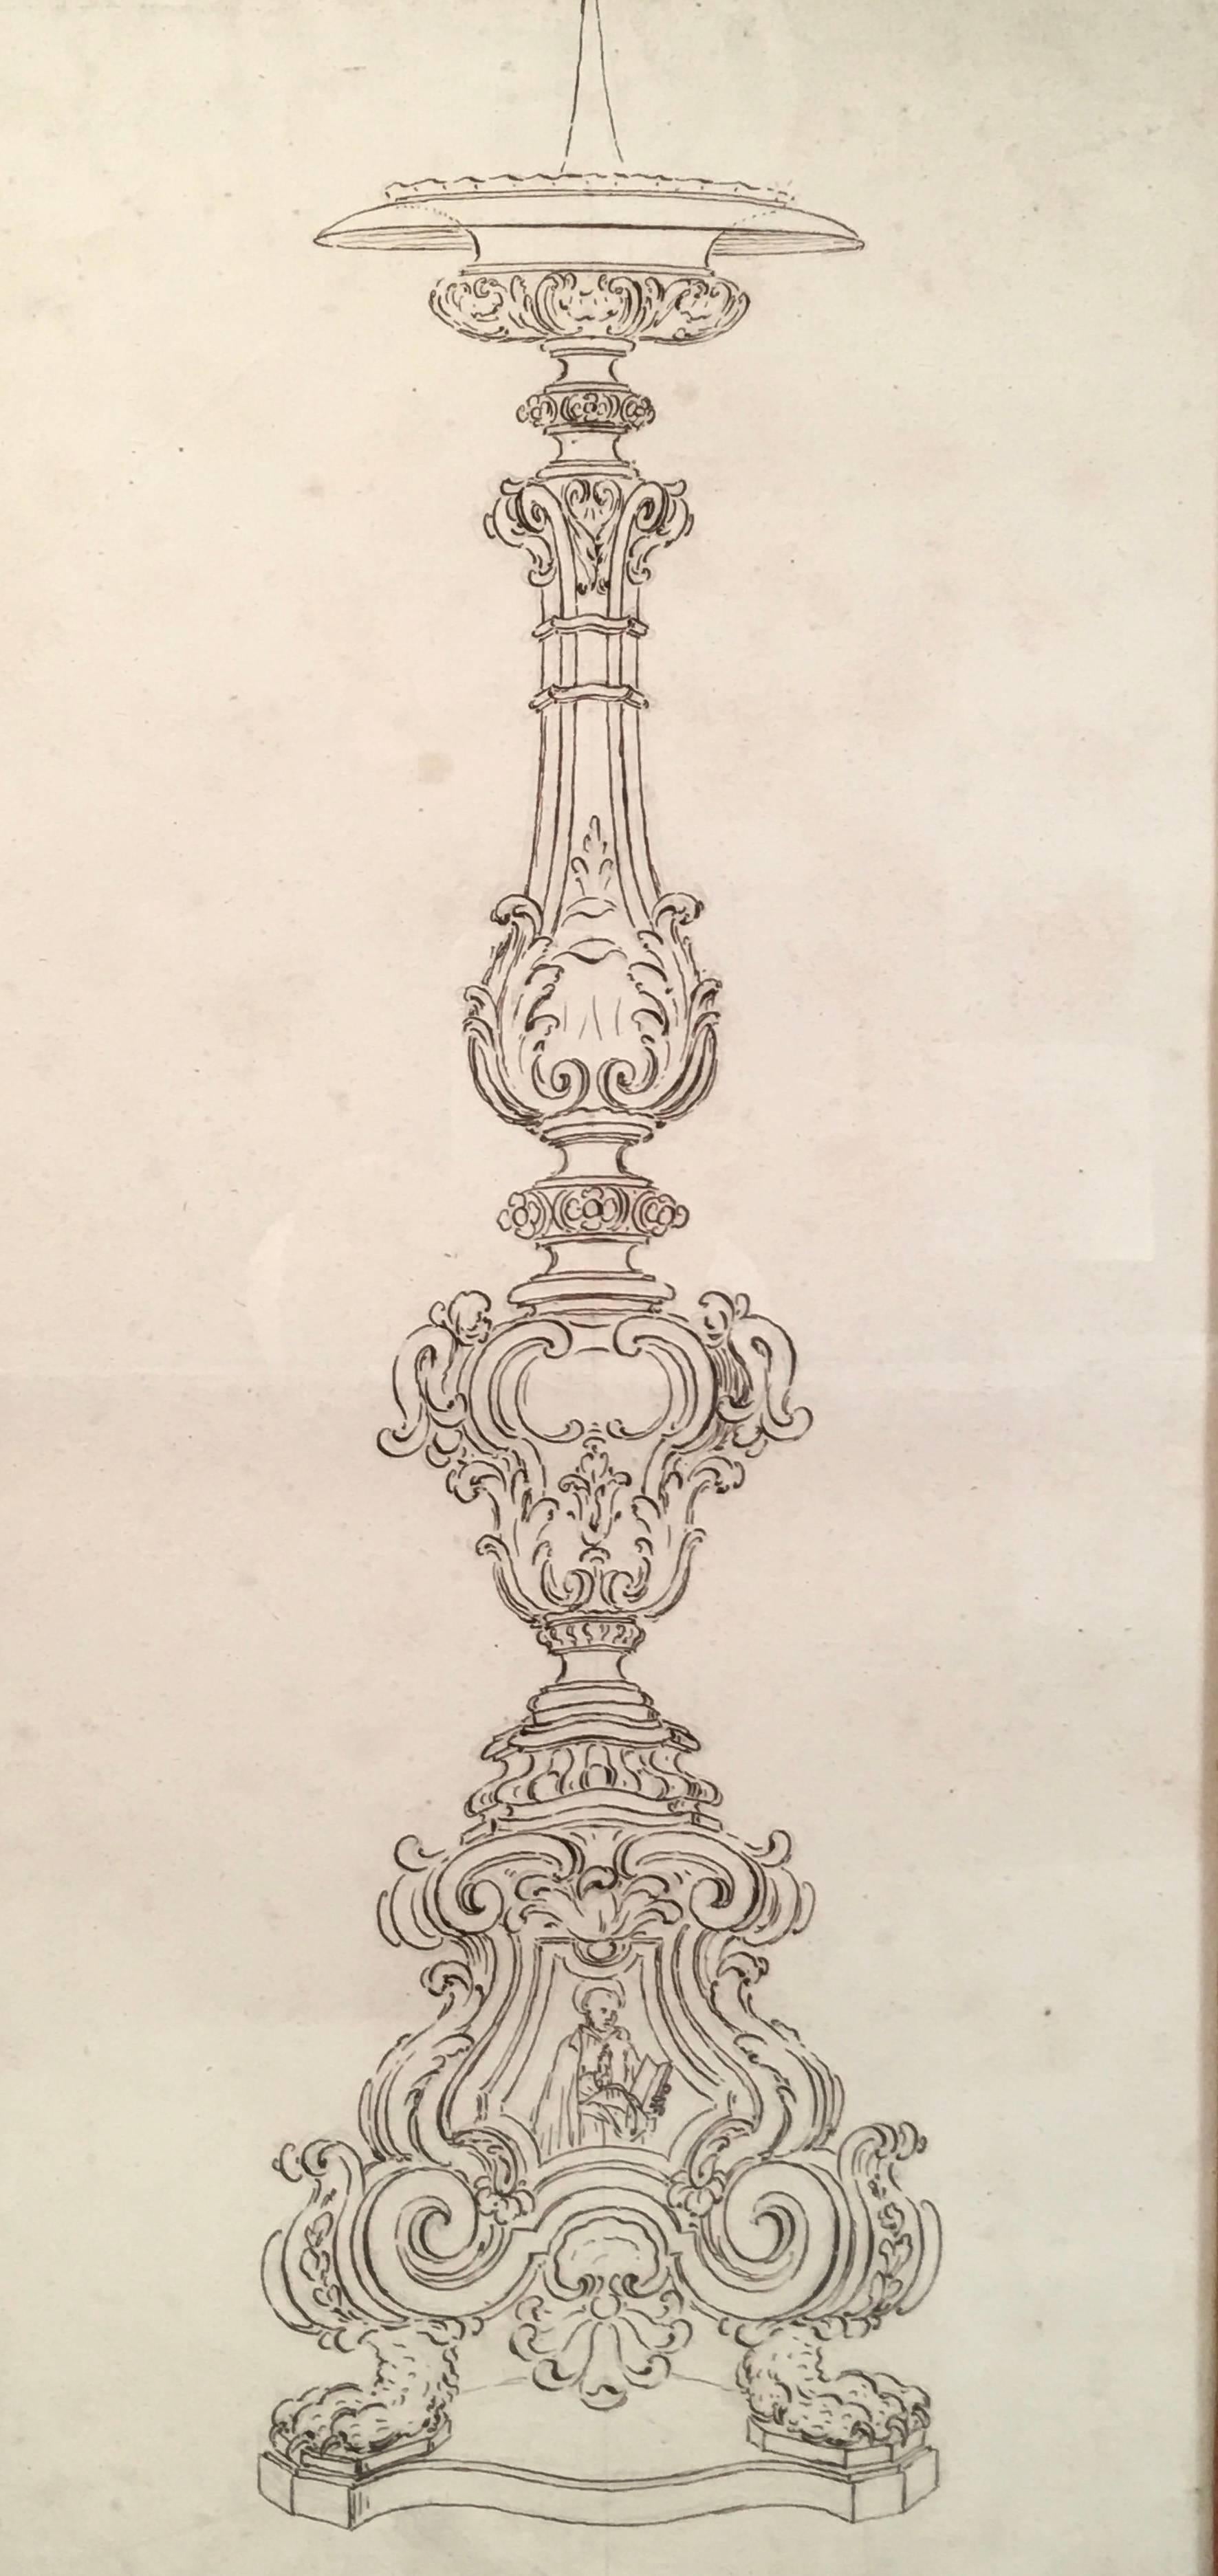 A fine quality 18th century Italian drawing of a Baroque pricket candlestick,  sepia ink on paper, joined in the middle, the pricket, or spike,  of the candlestick over a circular candle drip pan above a baluster turned base, elaborately ornamented